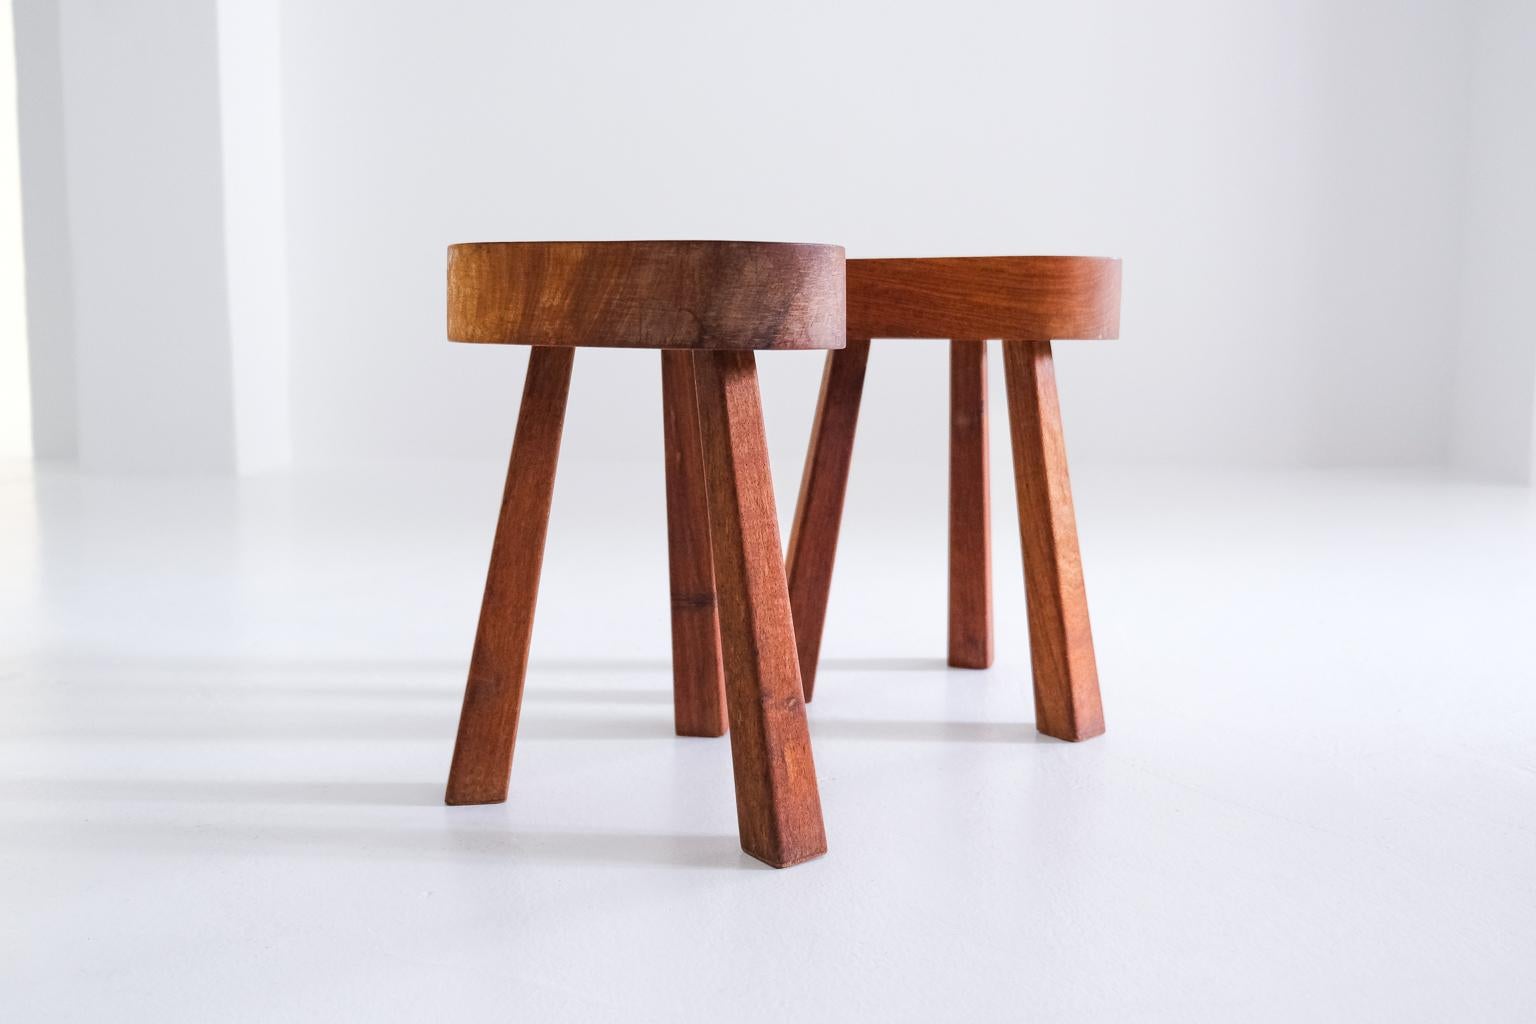 2 brutalist stools or sidetables of solid wood in the style of Chapo or Perriand In Good Condition For Sale In Frankfurt am Main, DE